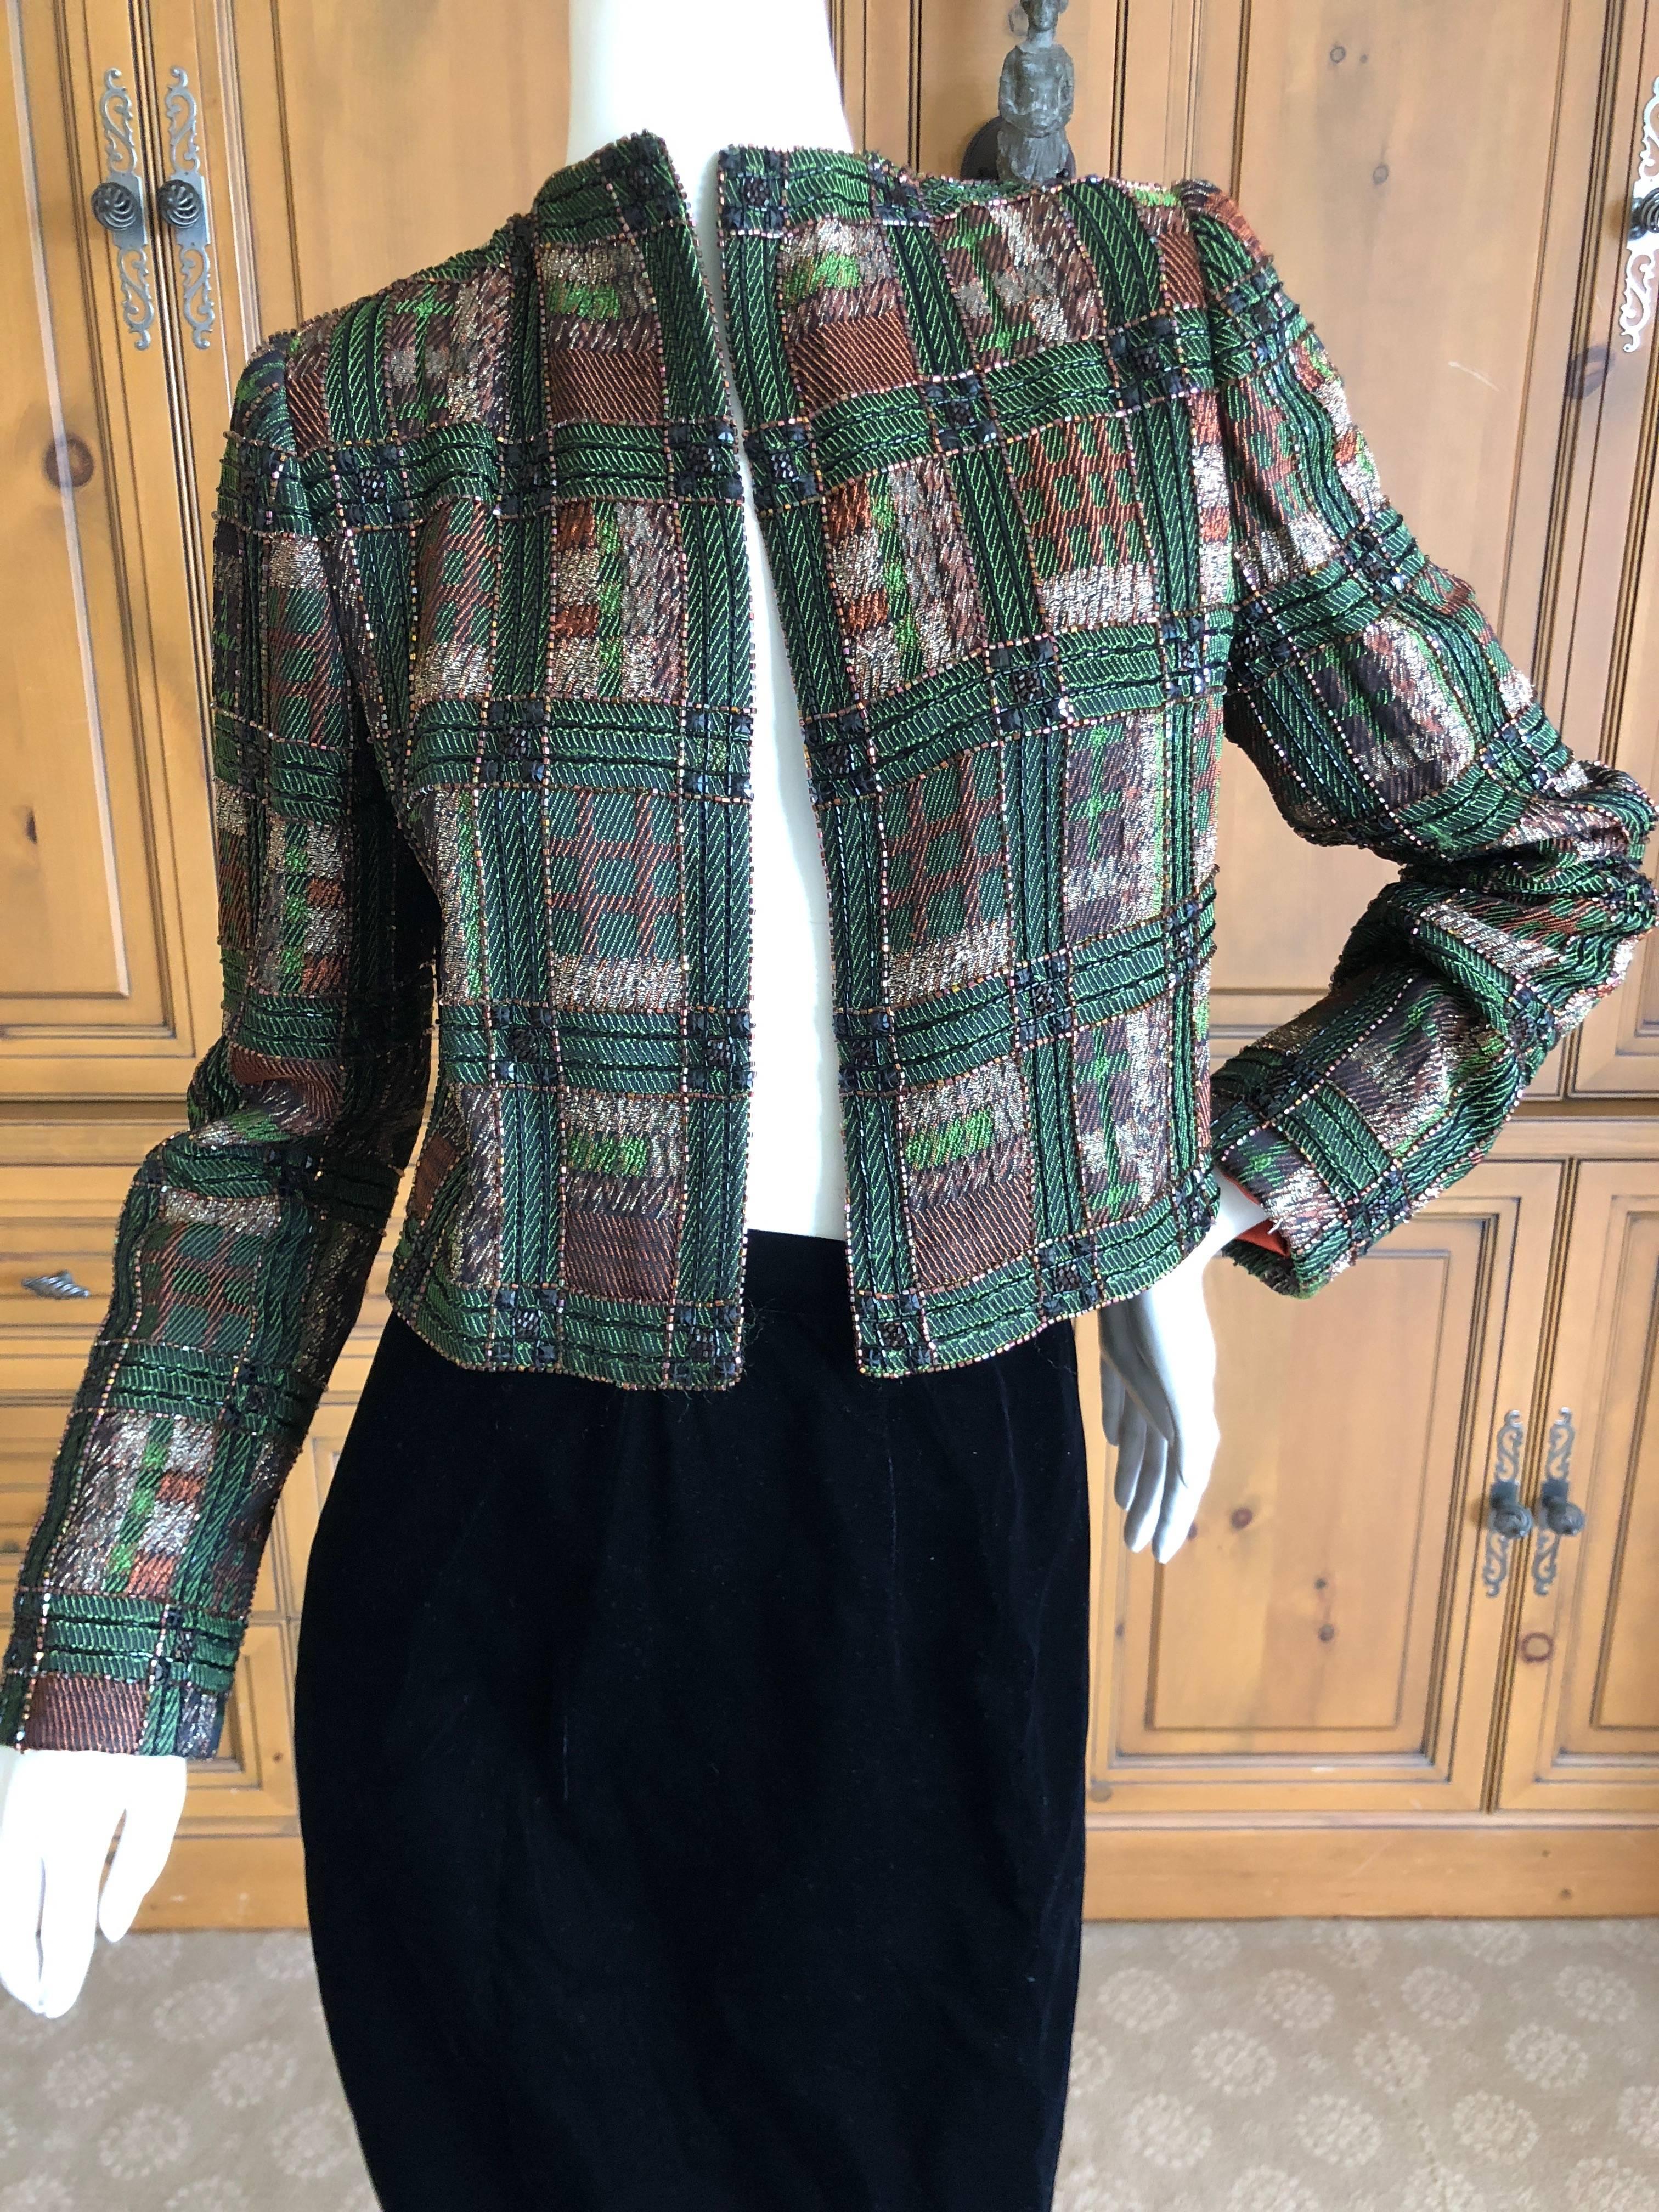 Bob Mackie Tartan Beaded jacket In Excellent Condition For Sale In Cloverdale, CA